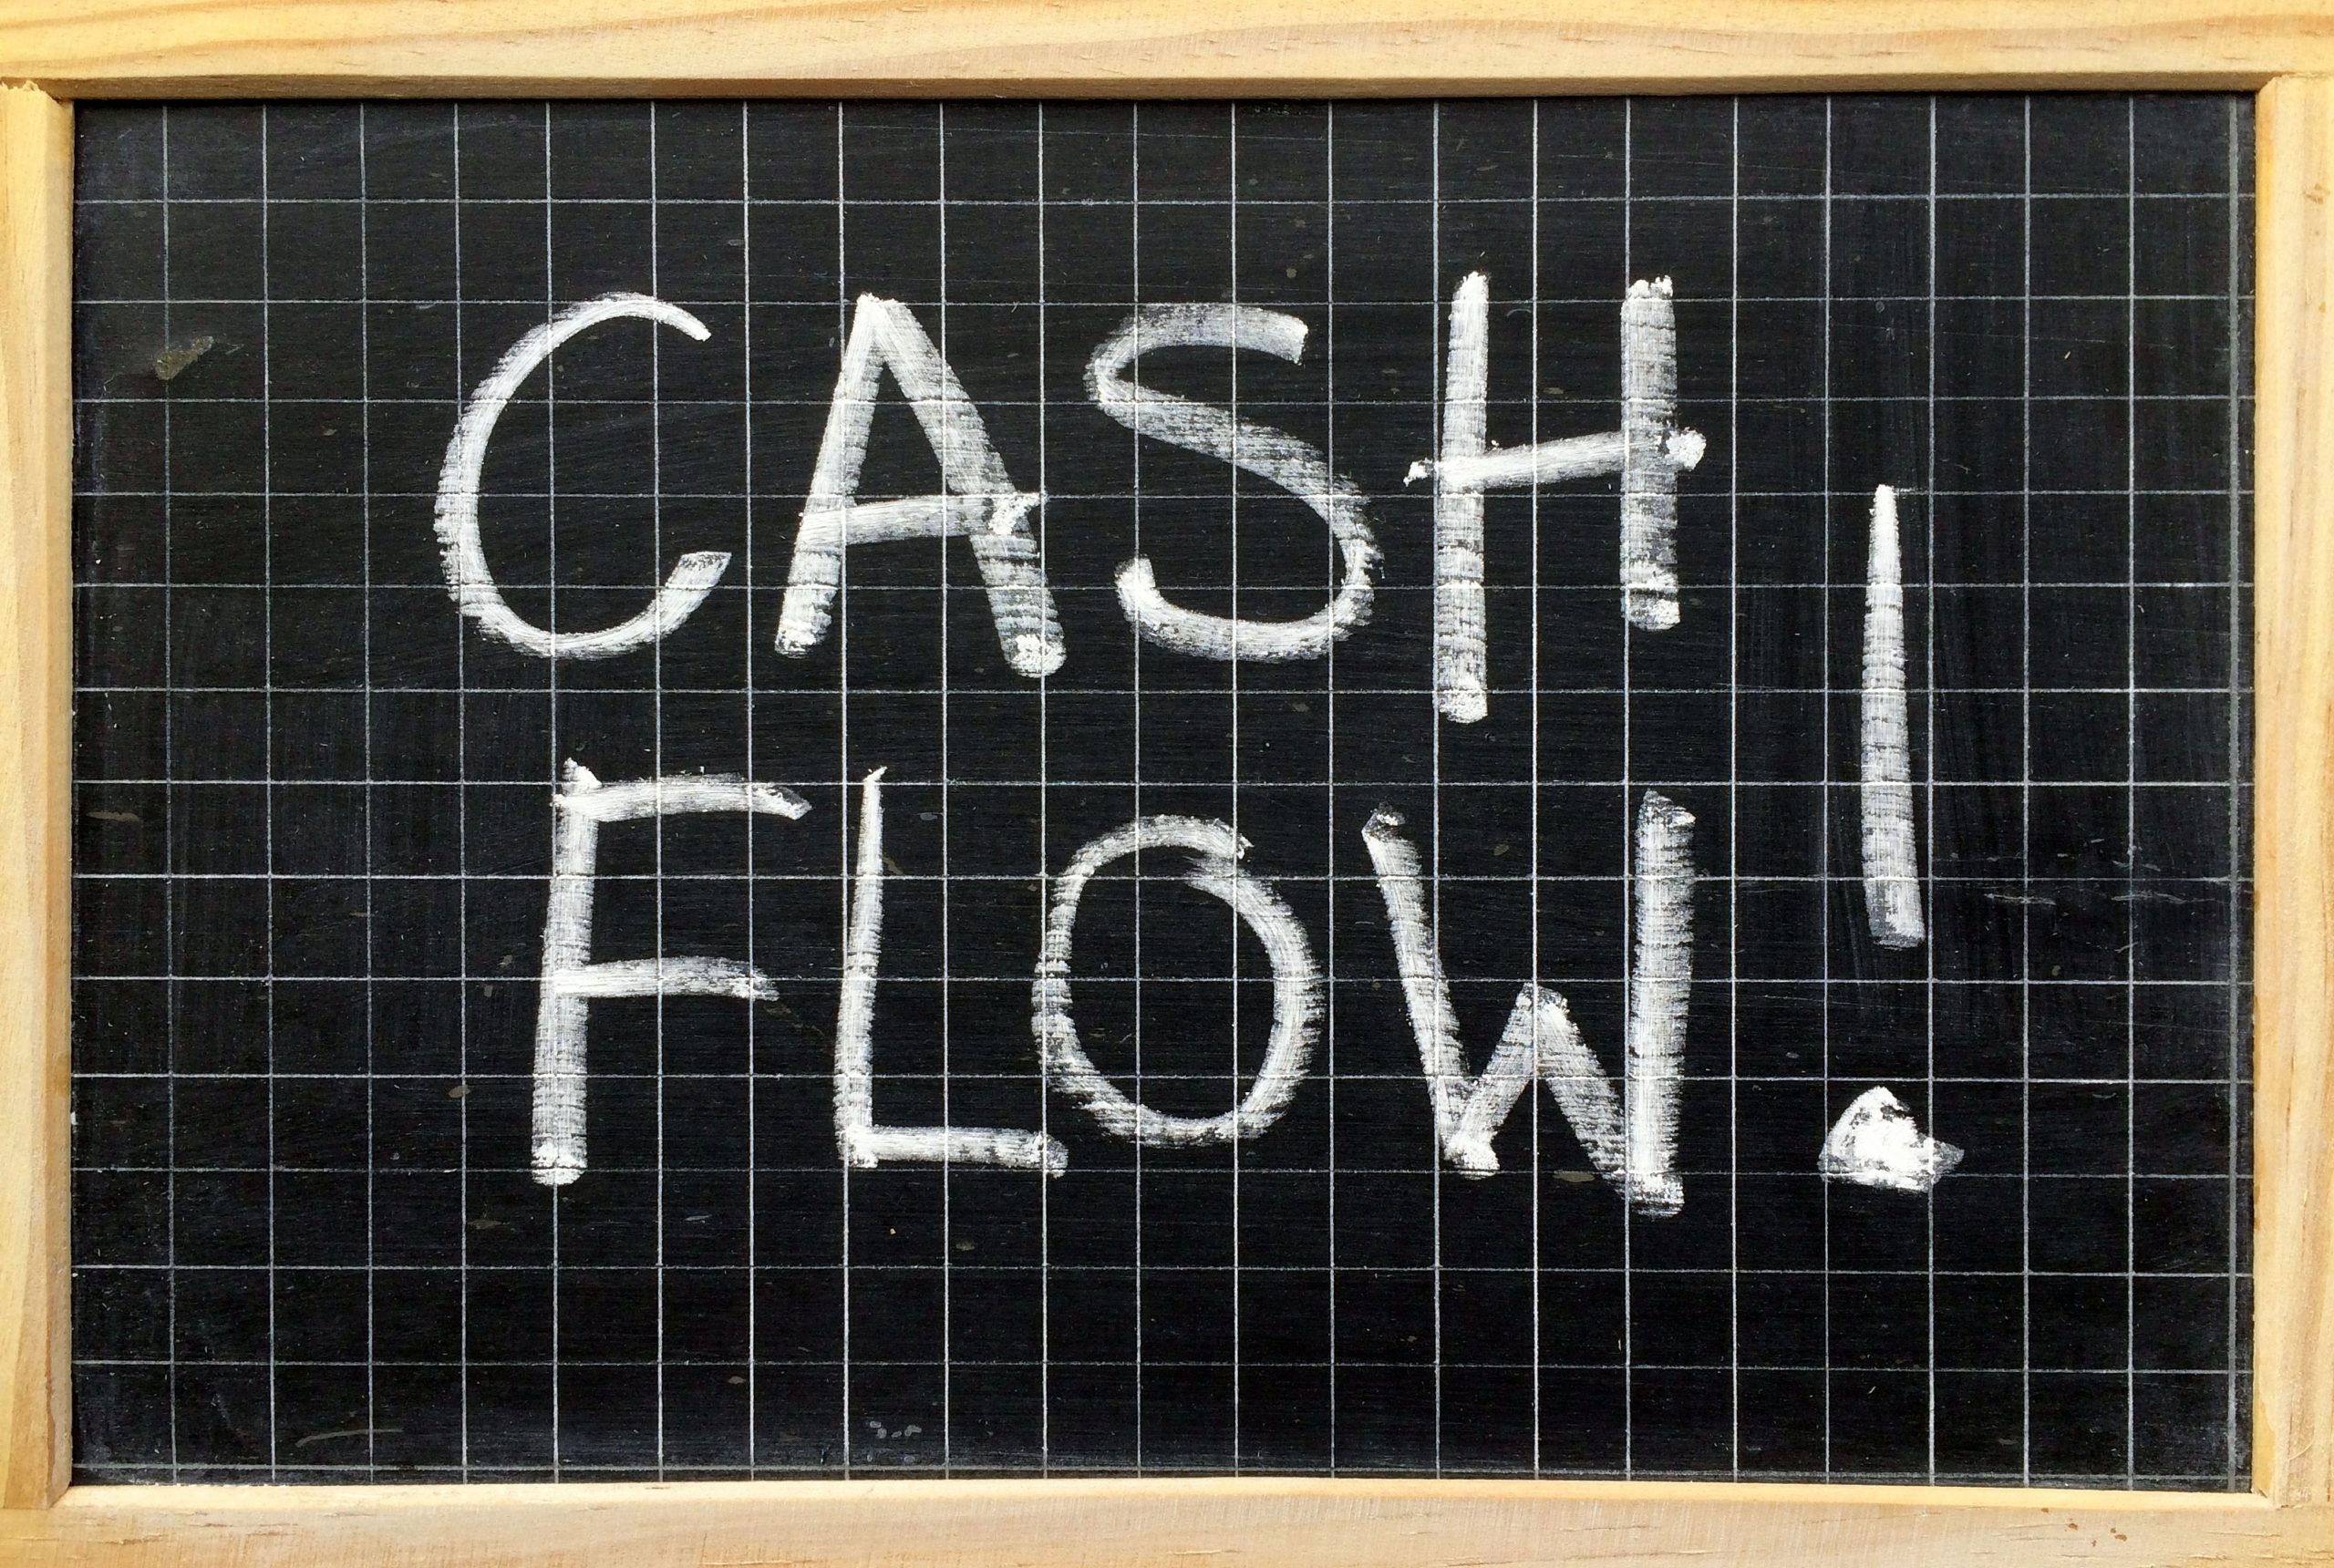 Cash flow is one of the main reasons a business shuts down.